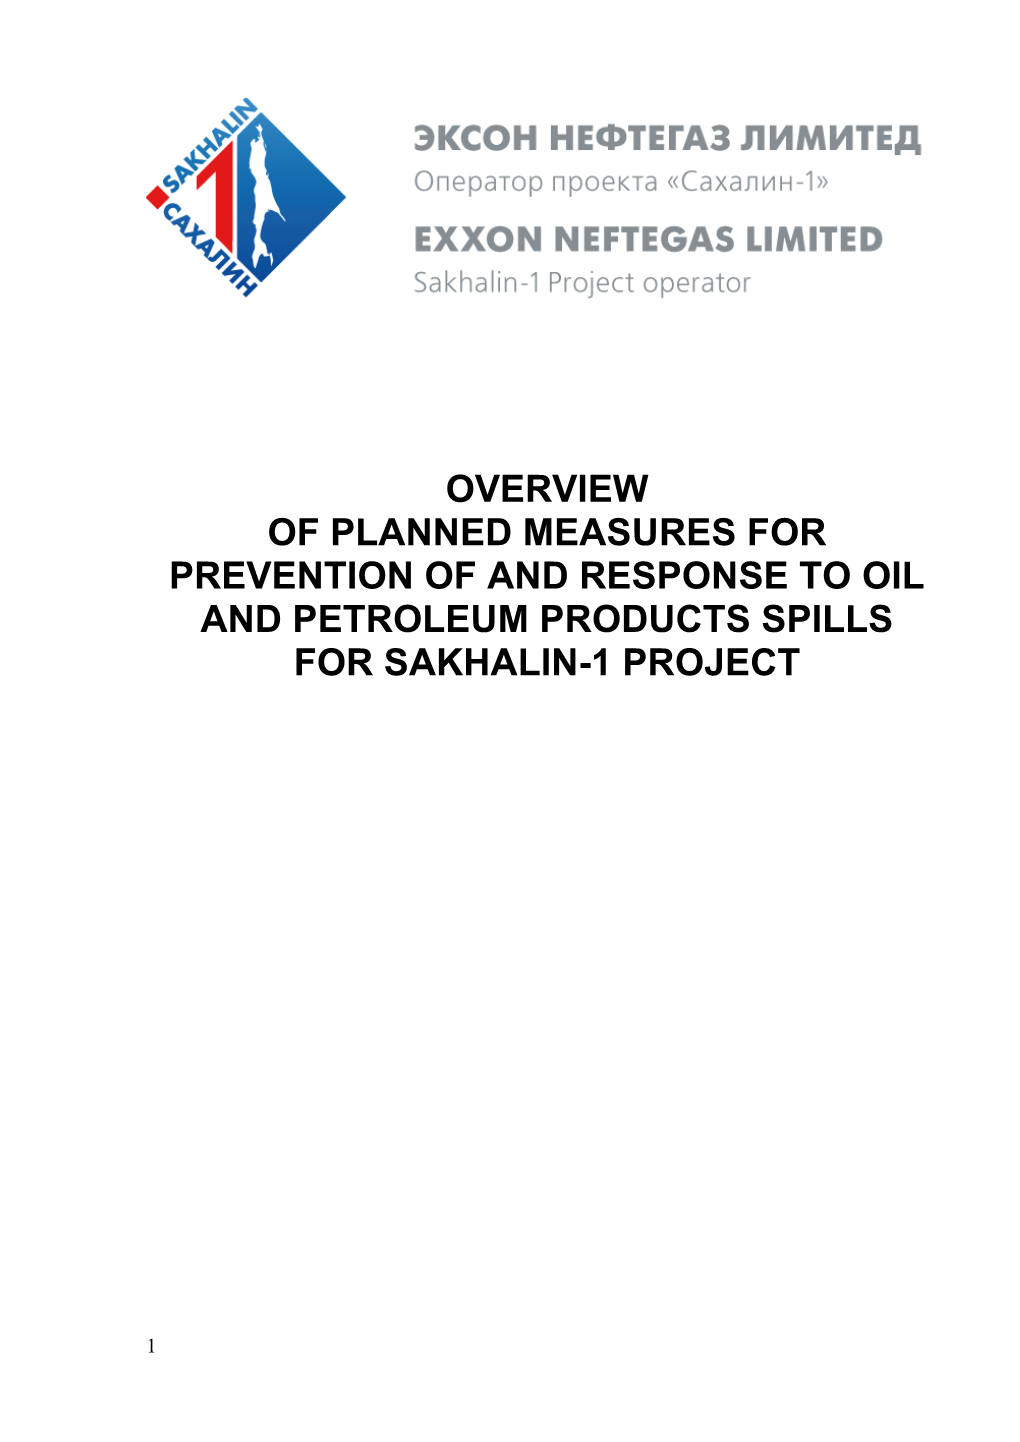 Overview of Planned Measures for Prevention of and Response to Oil and Petroleum Products Spills for Sakhalin-1 Project